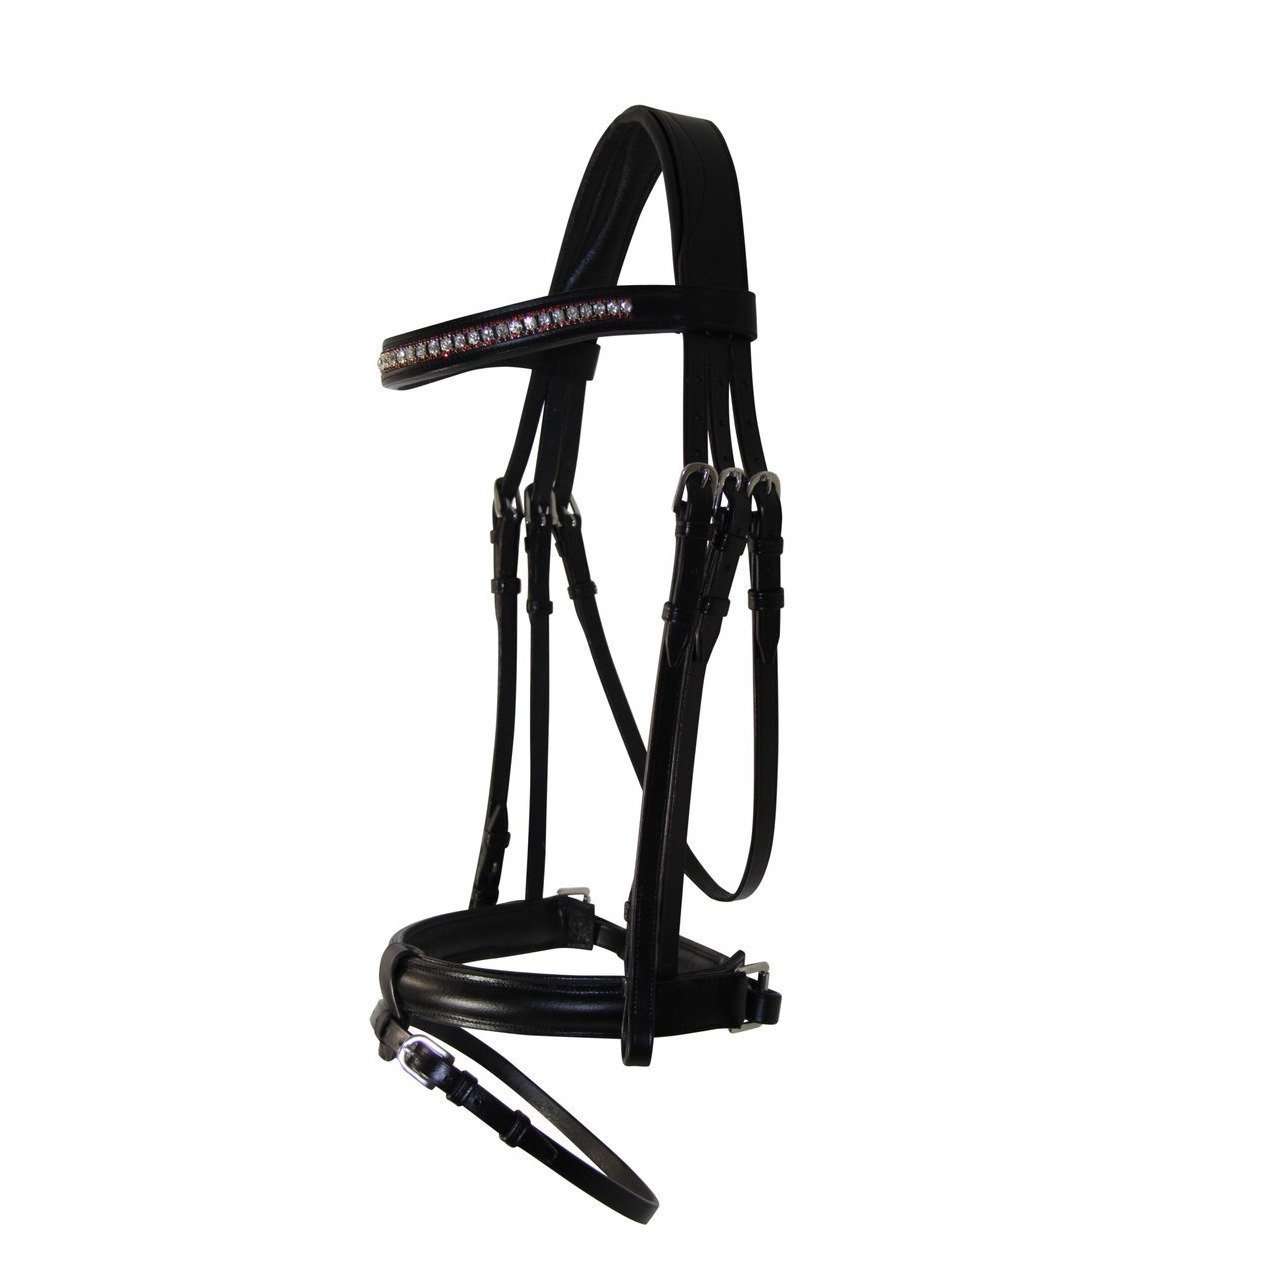 WHE Royale Pro Series 2 Hanoverian Style Bridle.